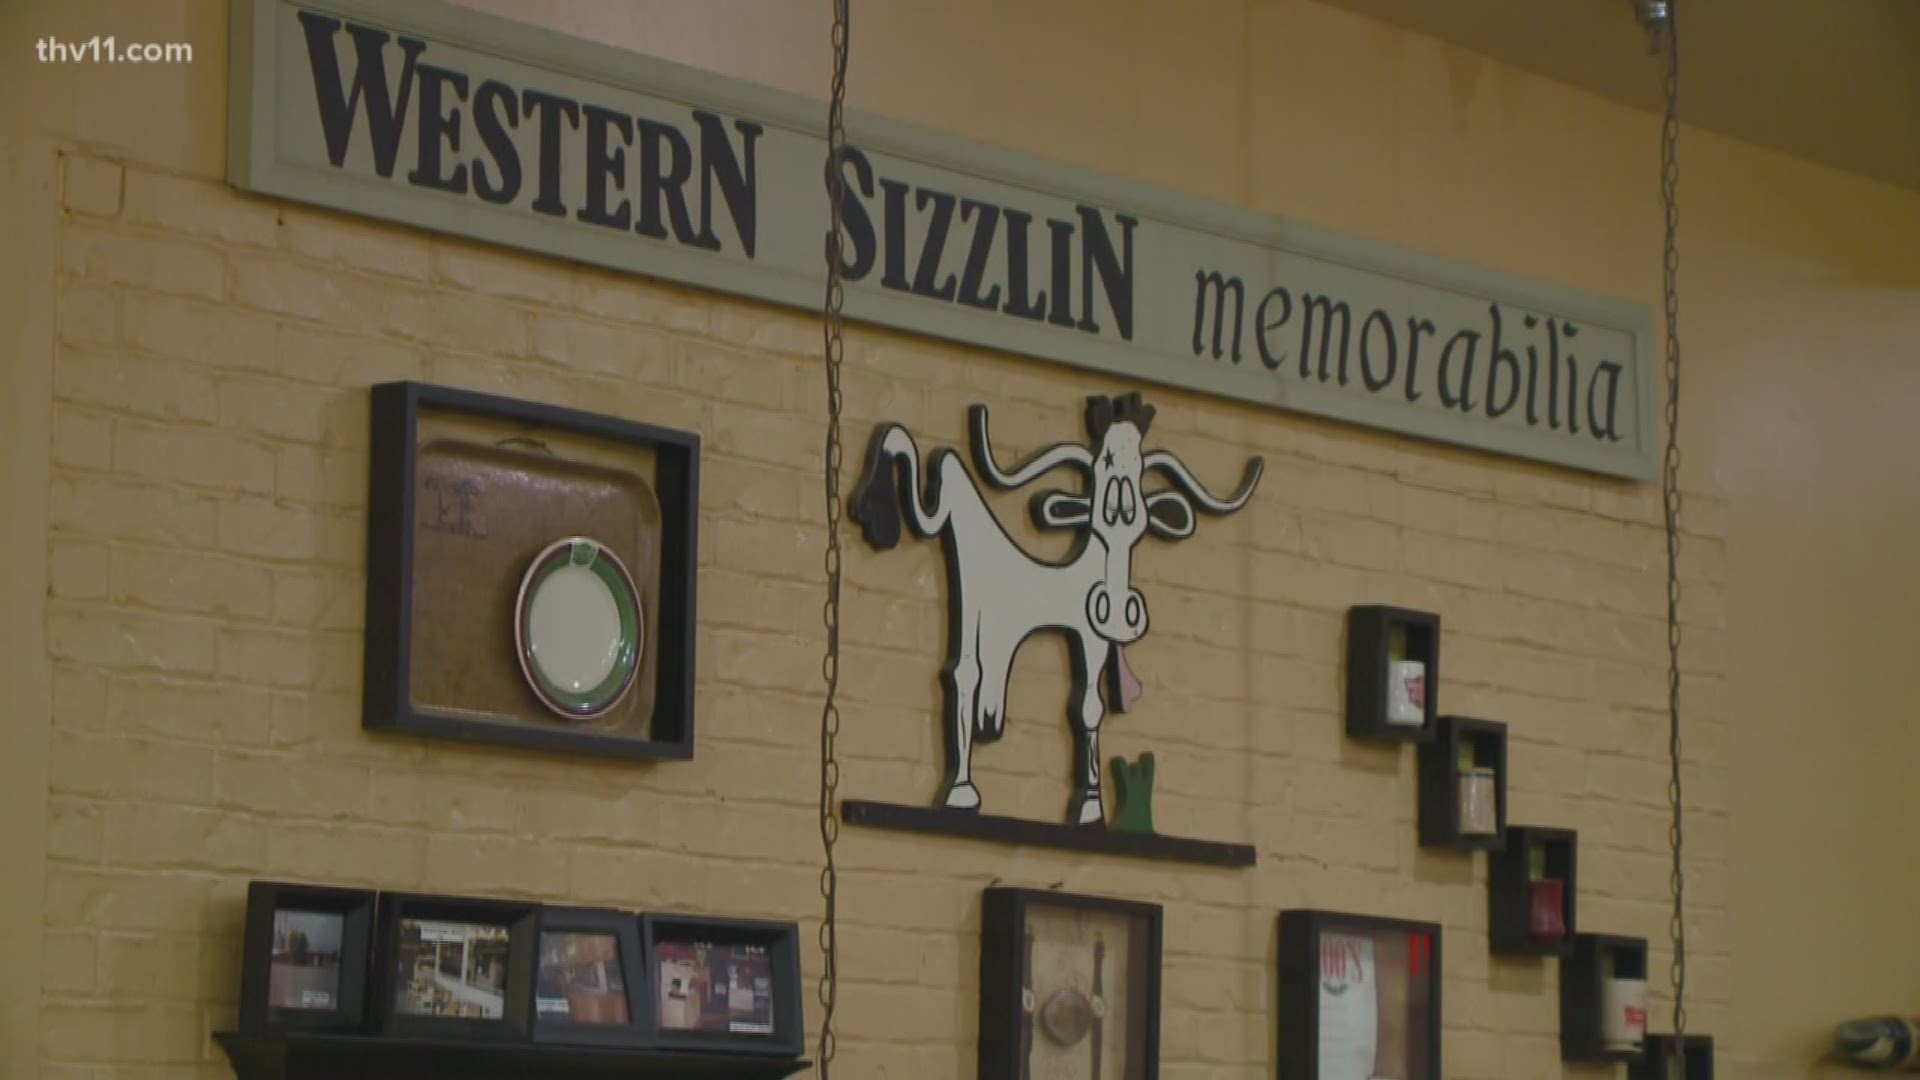 After 42 years of service, the Western Sizzlin in Benton closed its doors for the final time tonight.